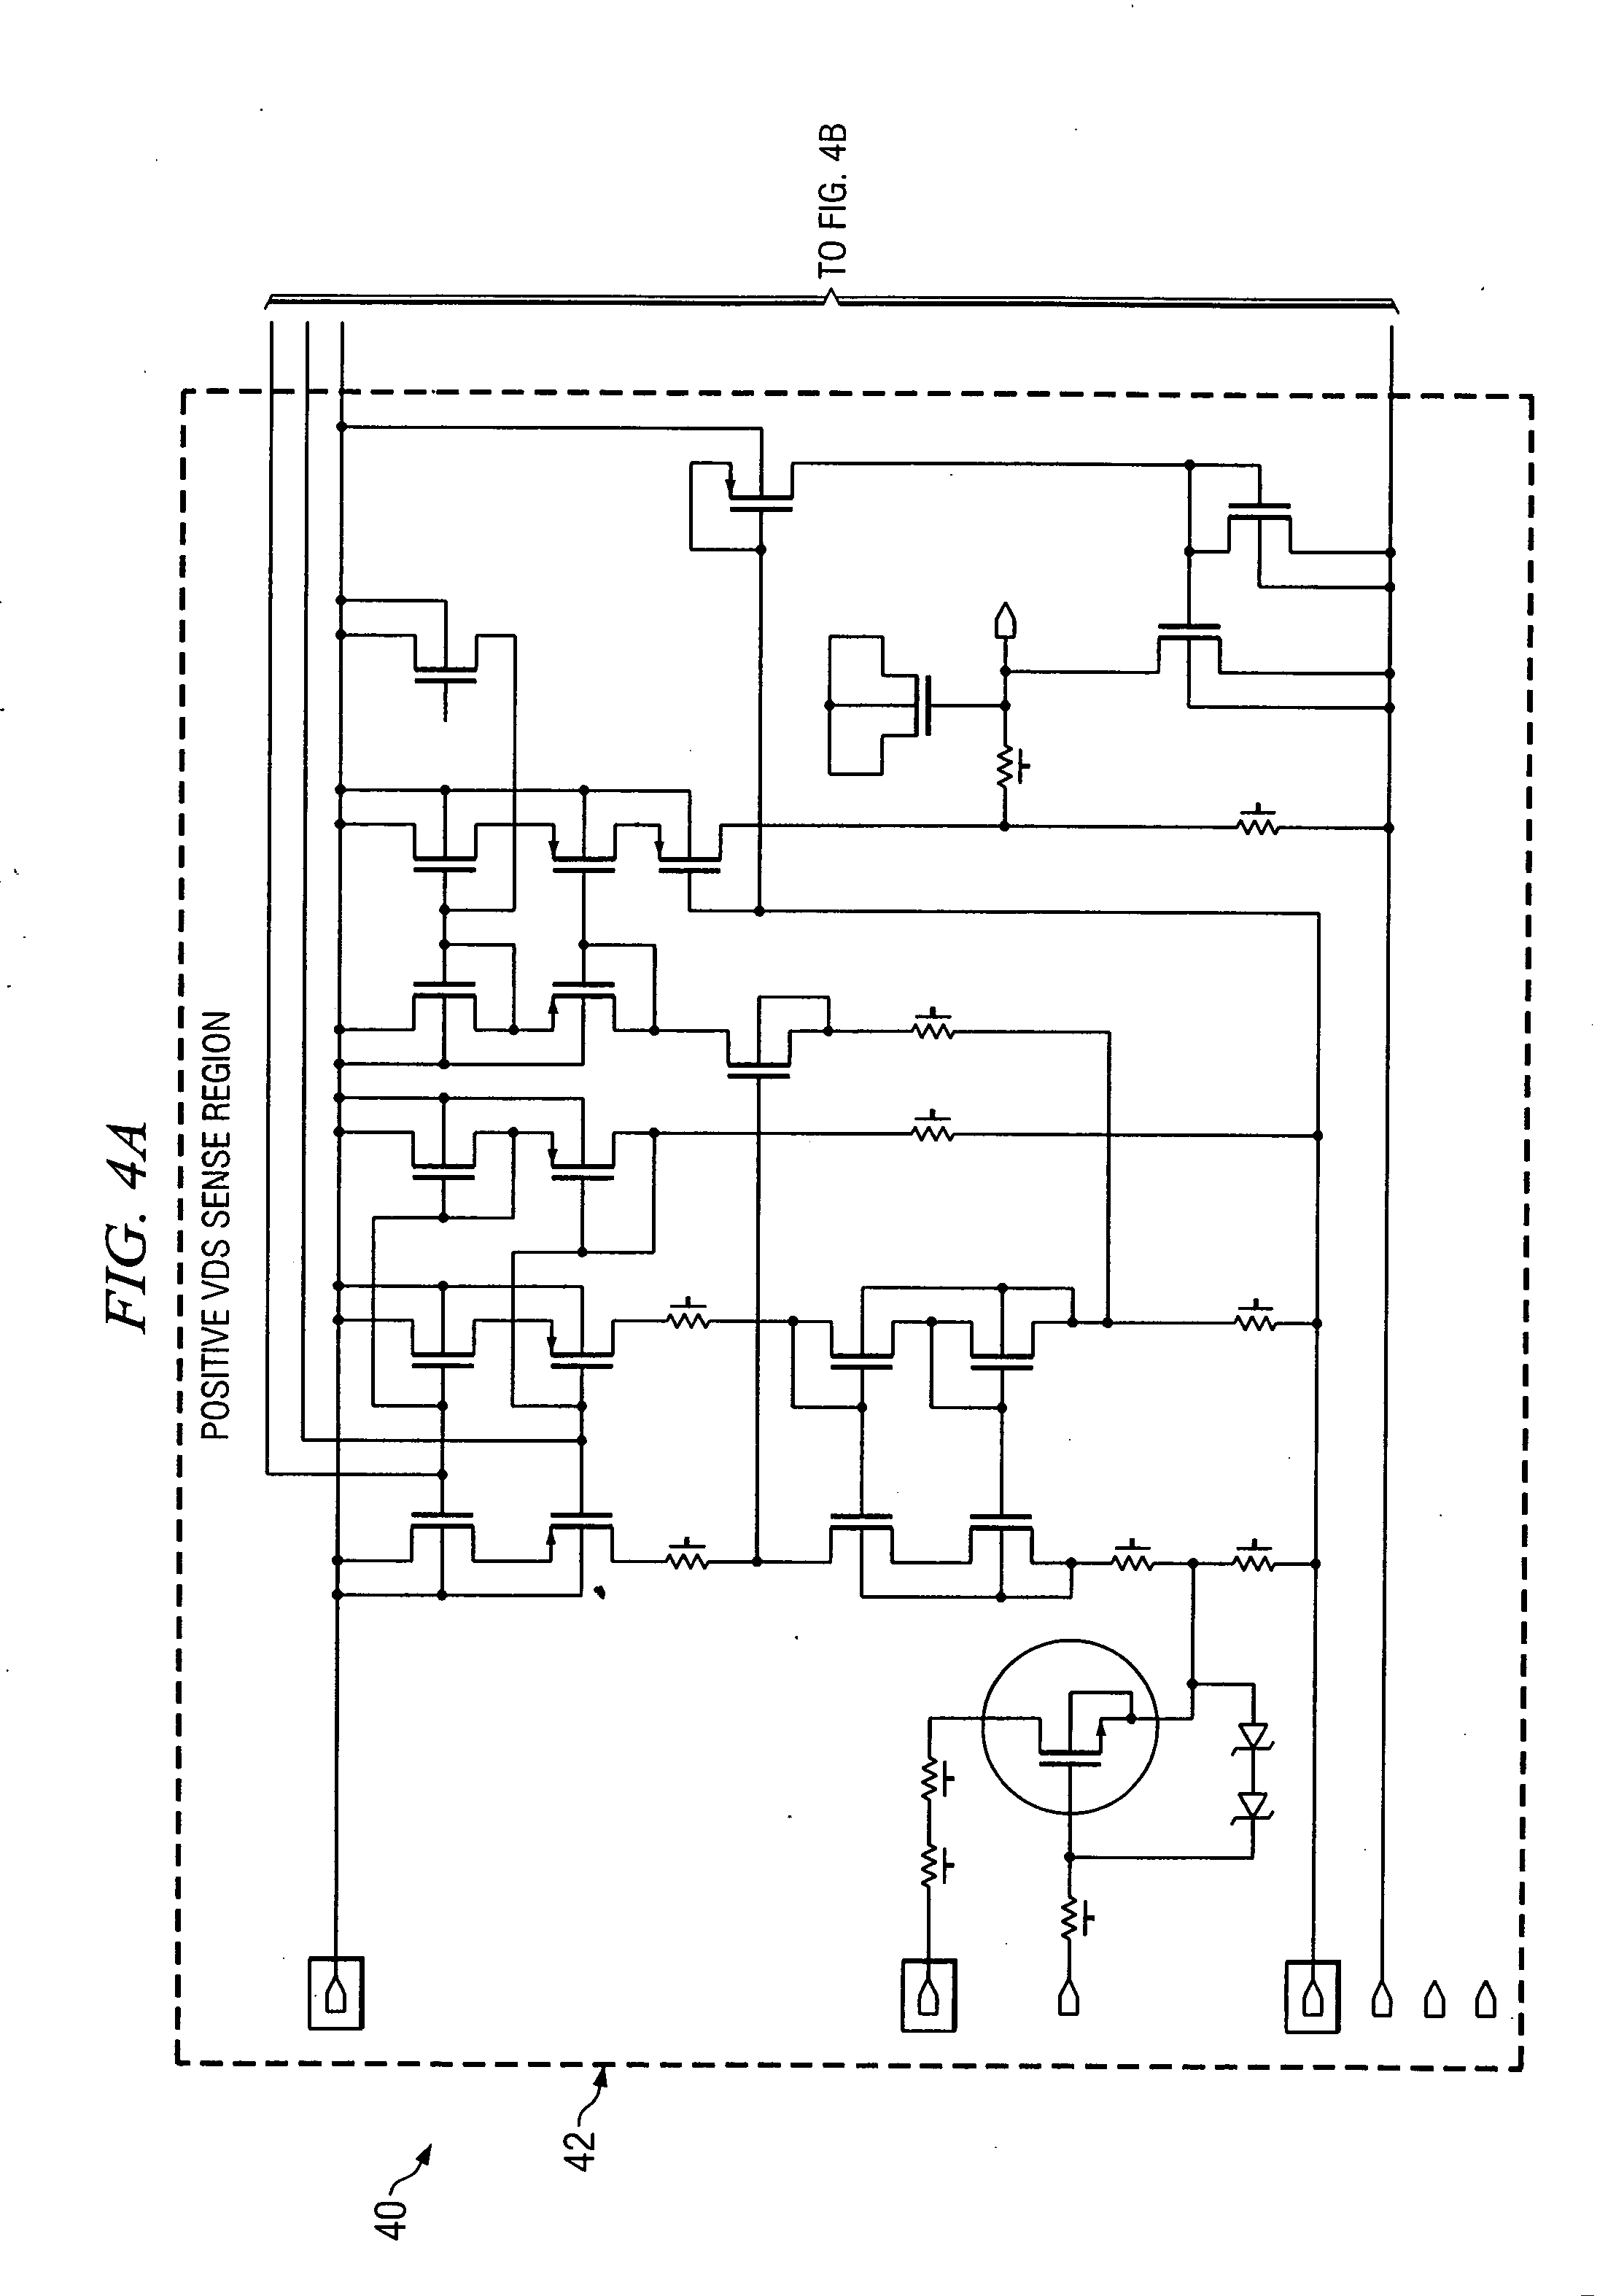 Transistor overcurrent detection circuit with improved response time